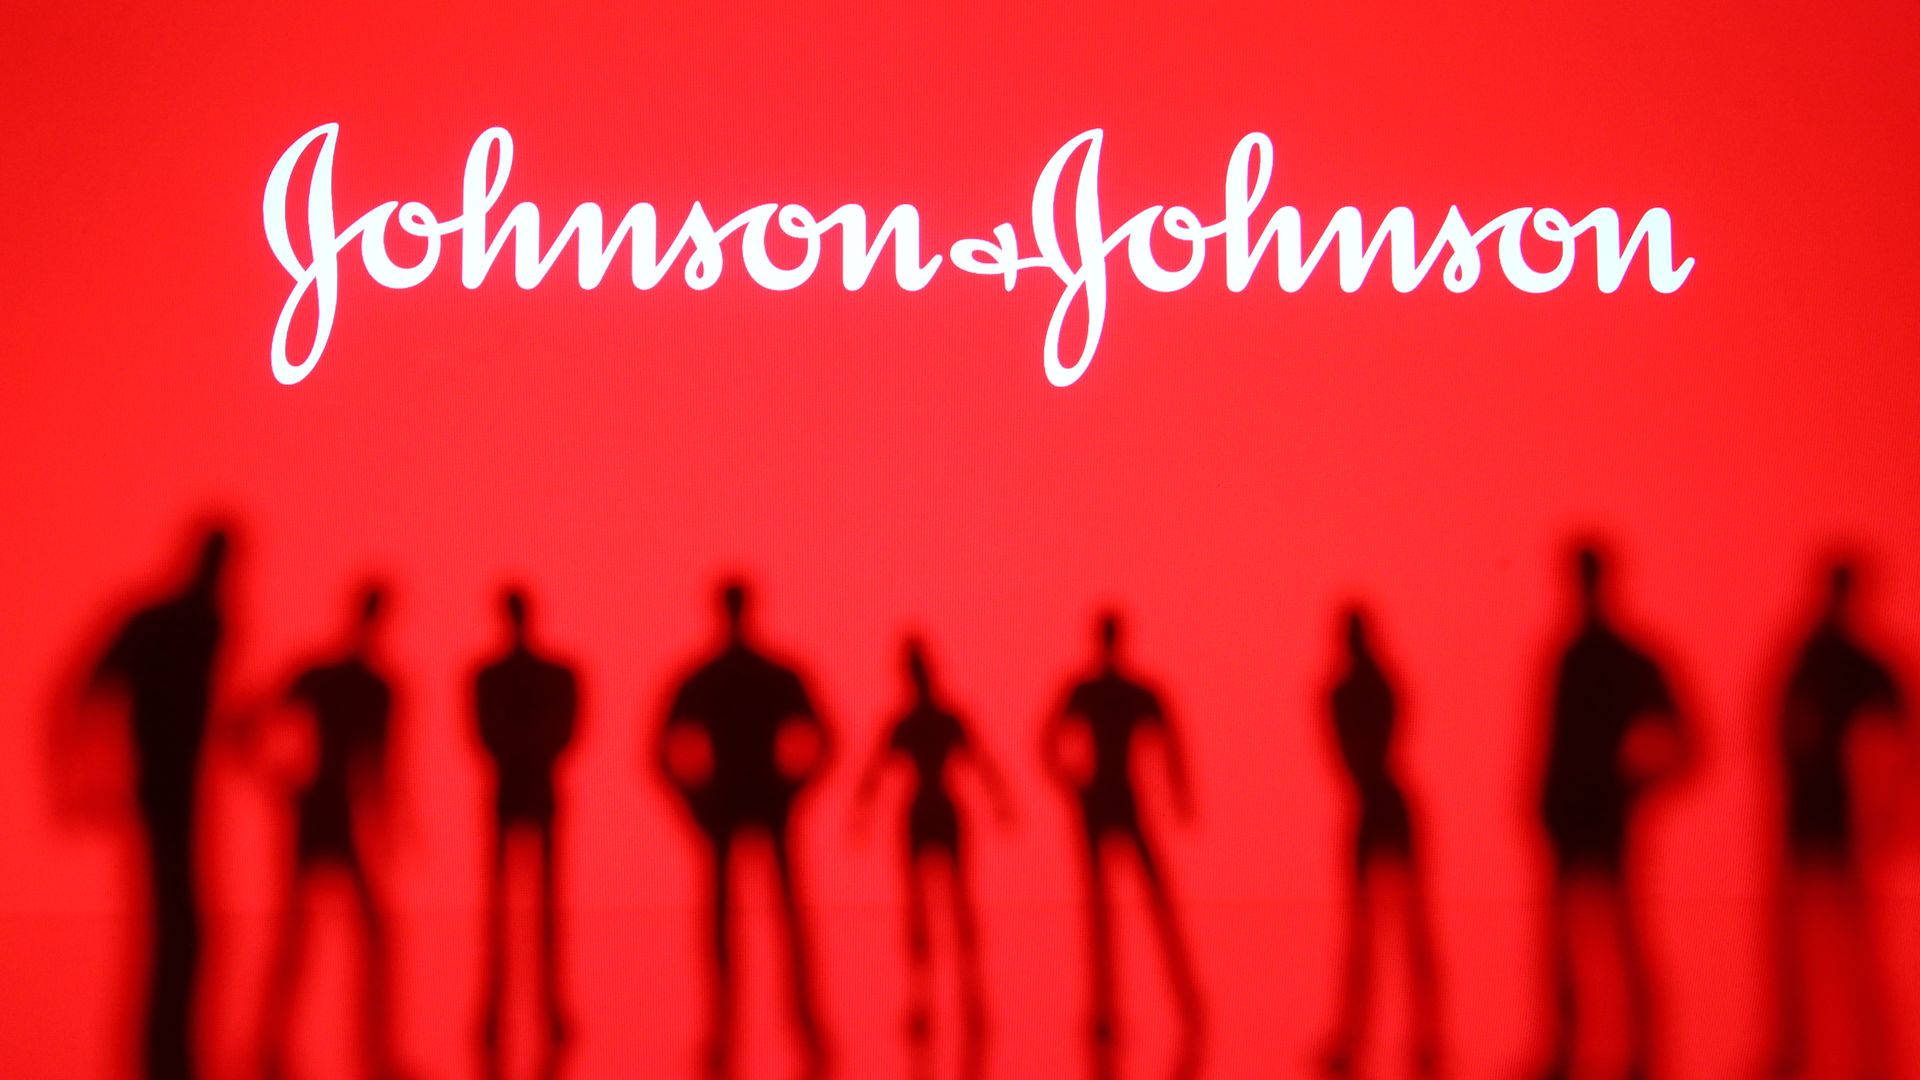 illustration of Johnson and Johnson logo above shadows of people